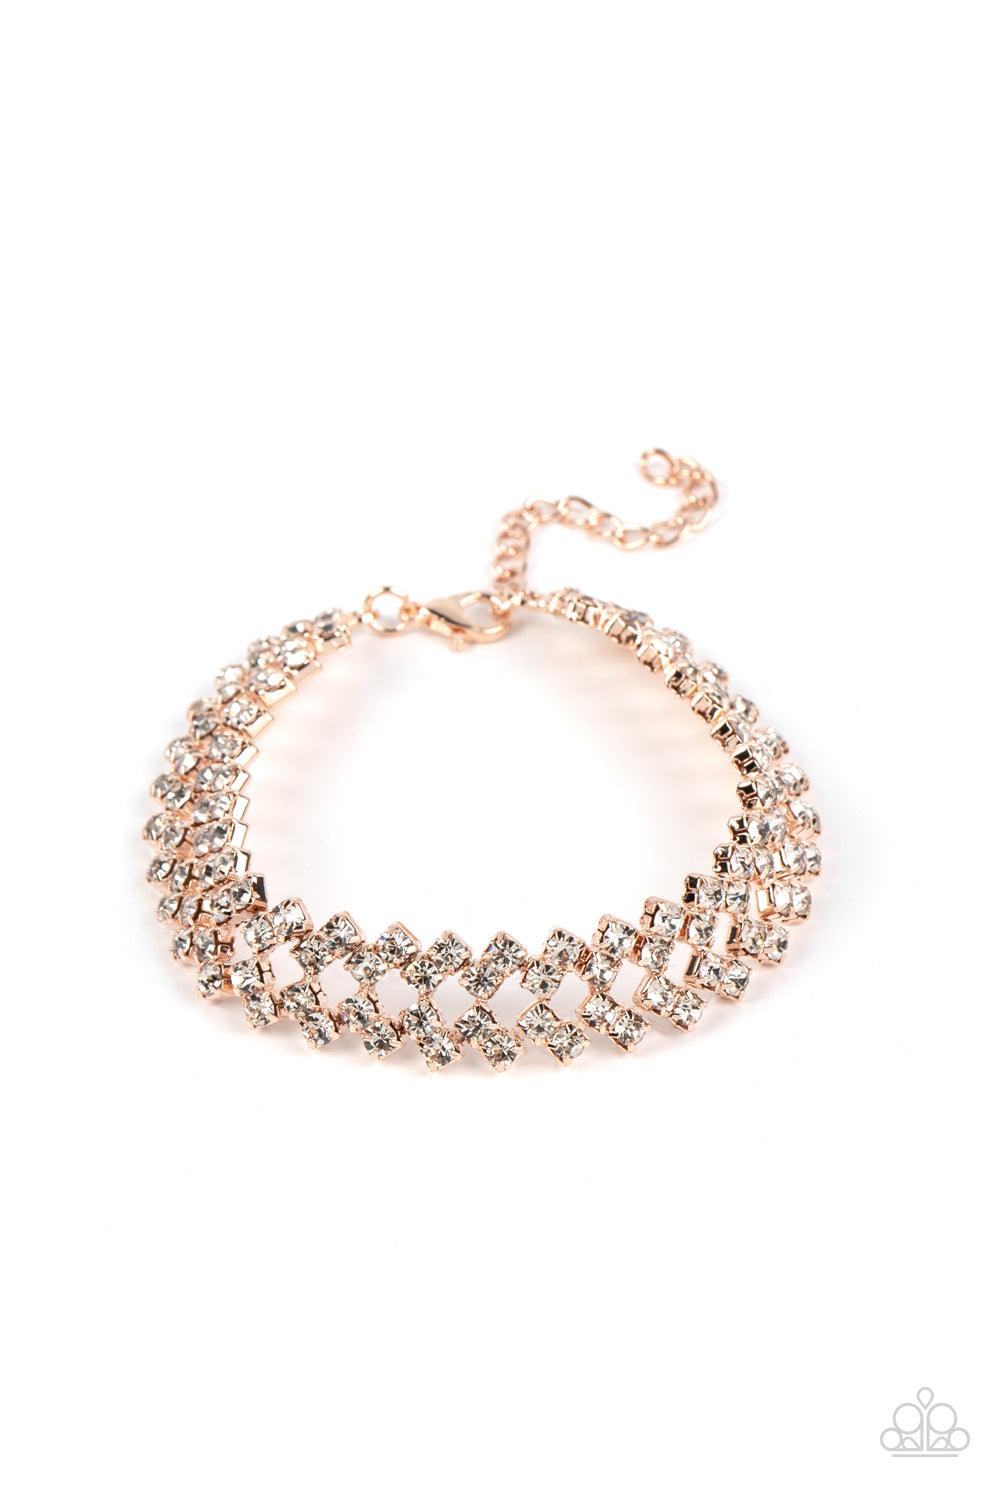 Dressed to Frill Rose Gold Bracelet - Jewelry by Bretta